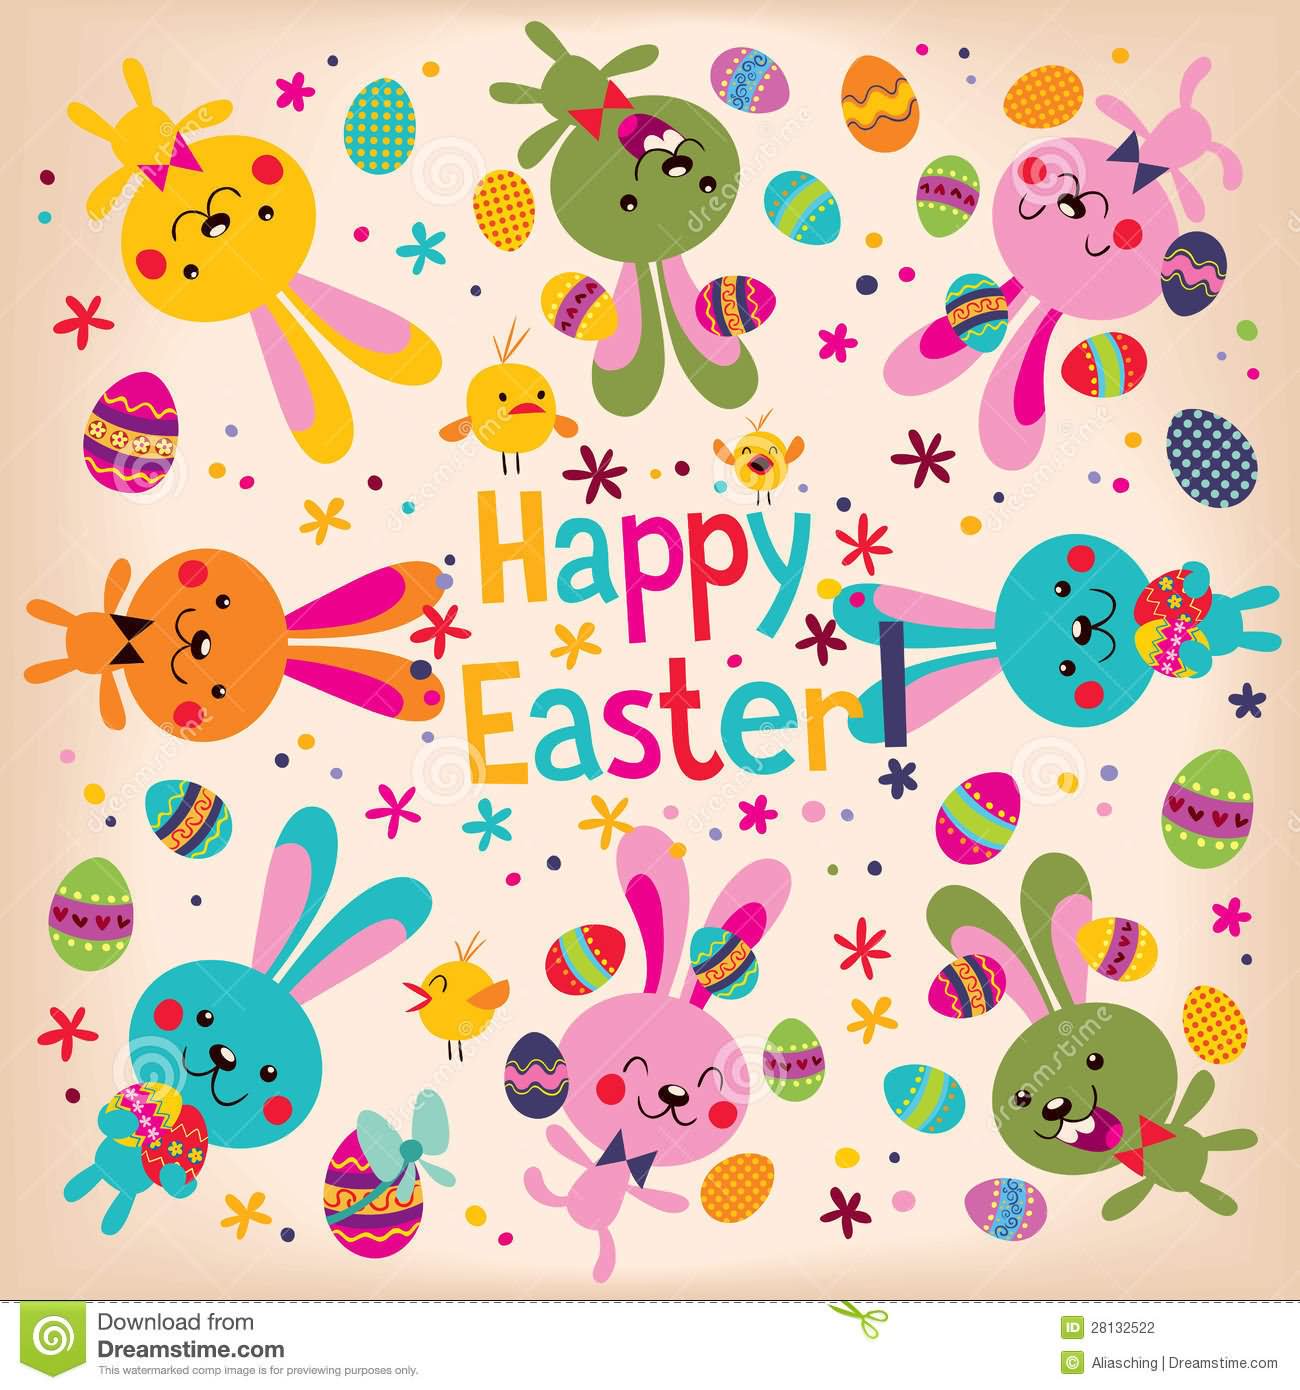 Happy Easter Colorful Greeting Card